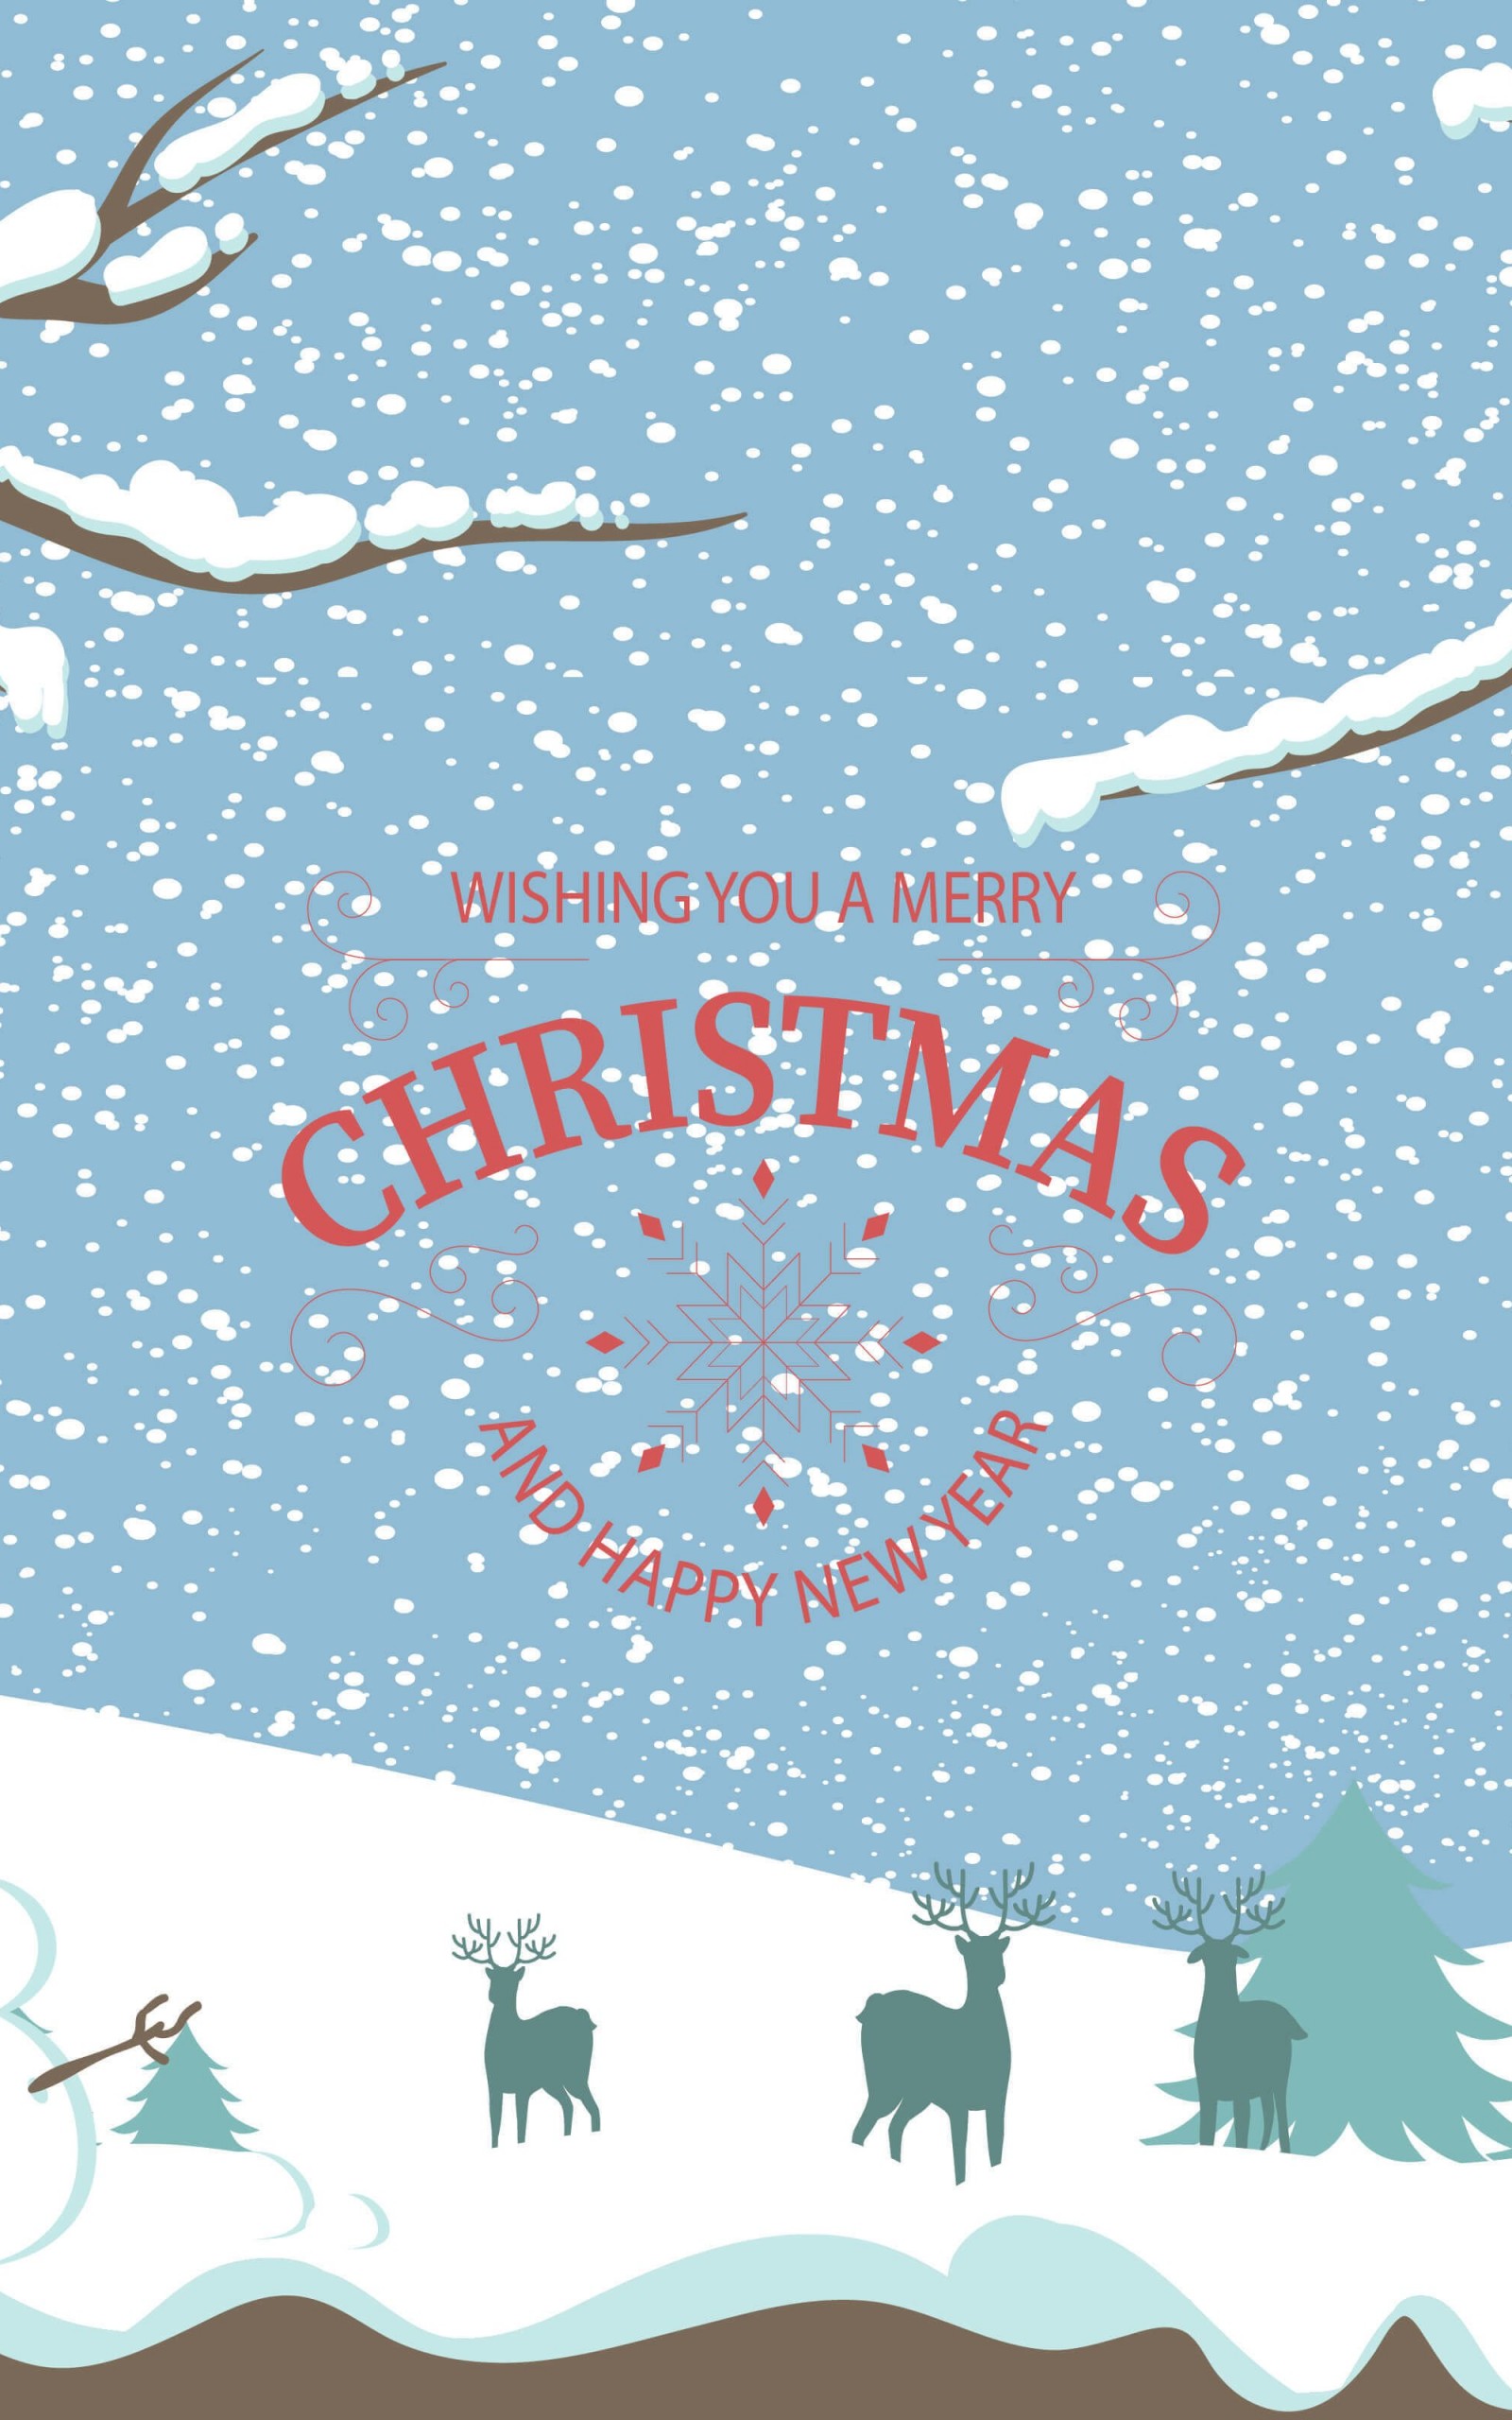 Merry Christmas Illustration Wallpaper for Amazon Kindle Fire HDX 8.9